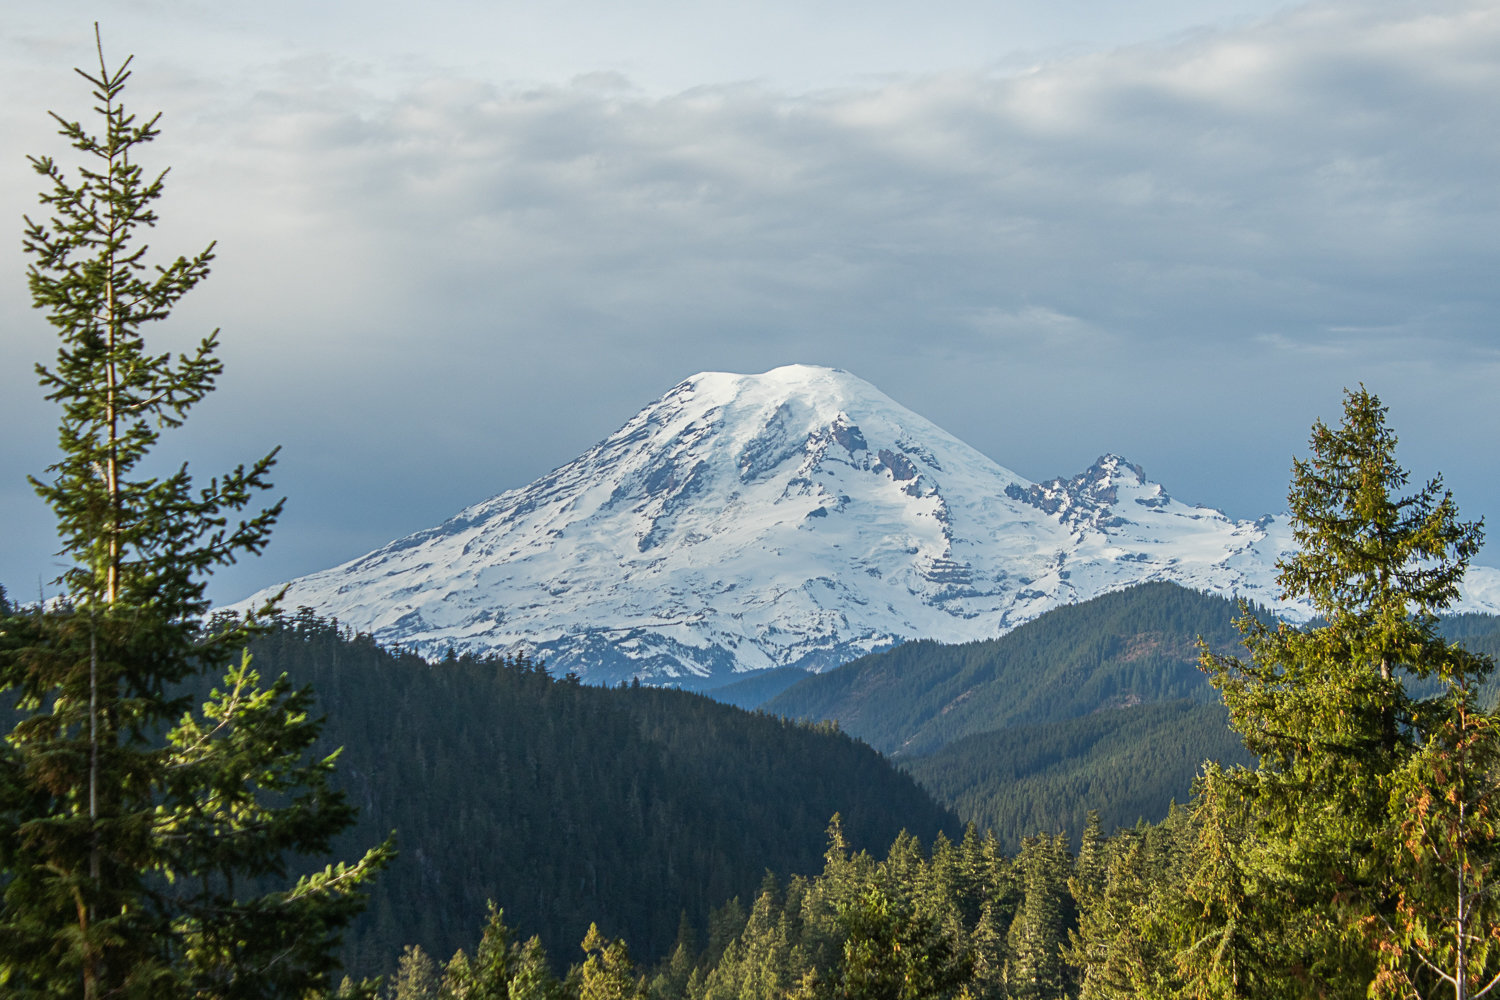 Glaciers are pictured on the southeastern face of Mount Rainier as seen from U.S. Highway 12 between Packwood and White Pass on Nov. 23.